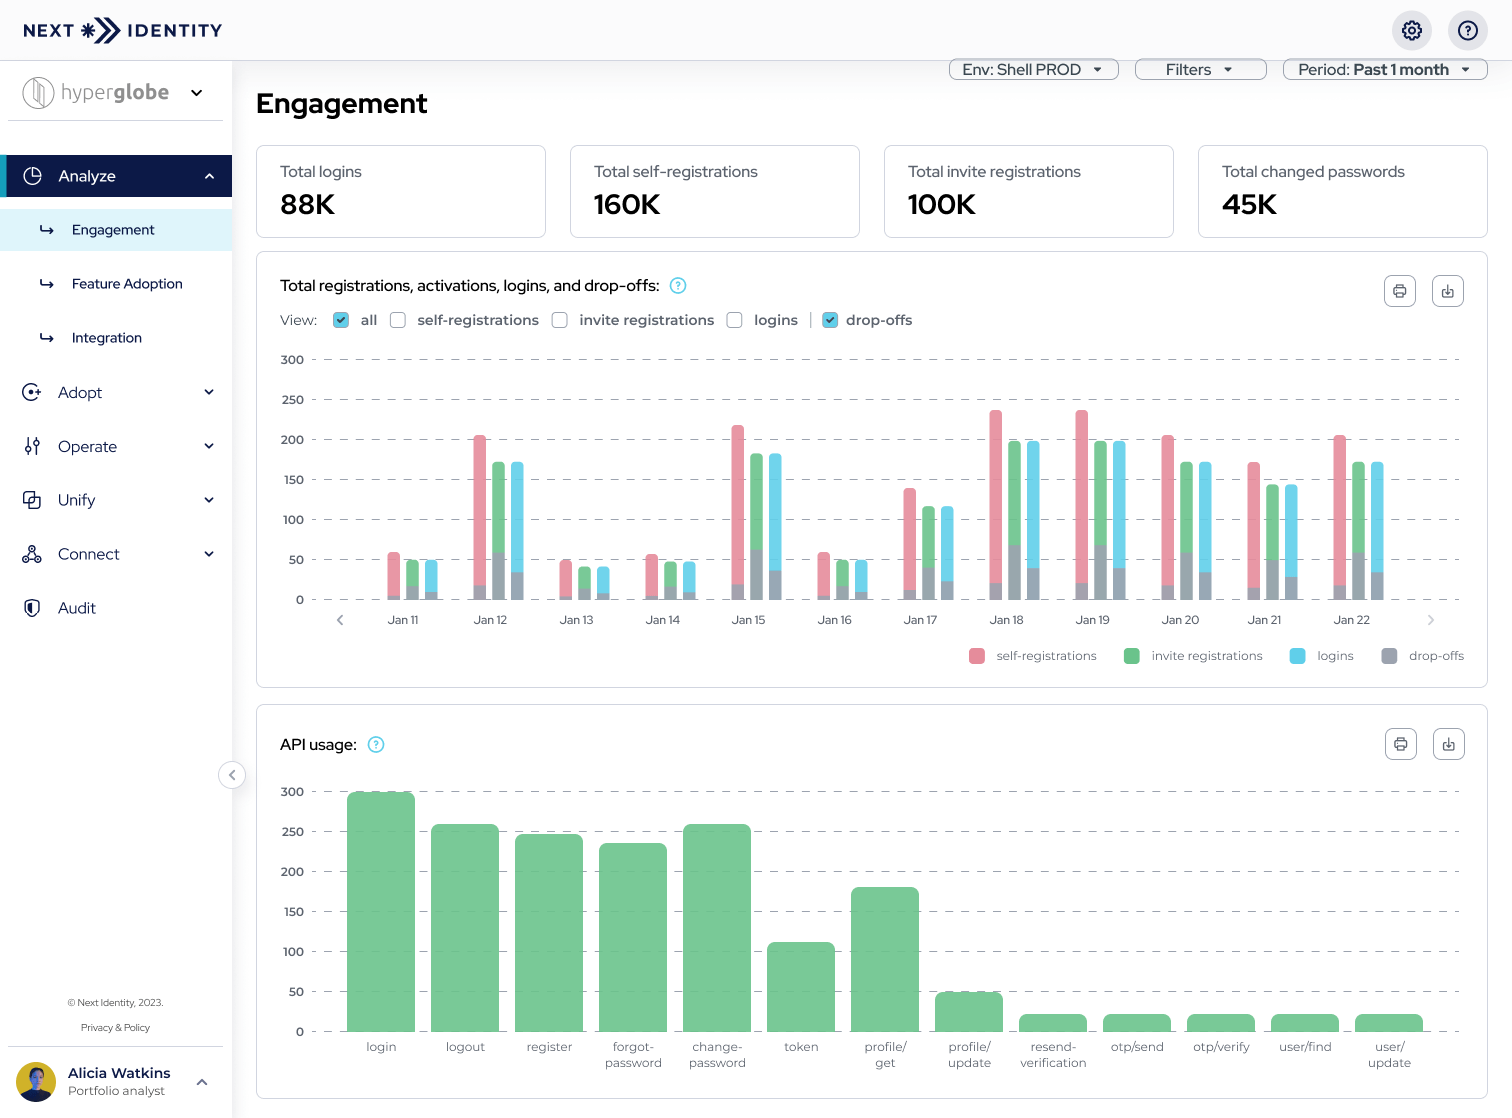 Overview on Next Identity Analyze - Engagement Page